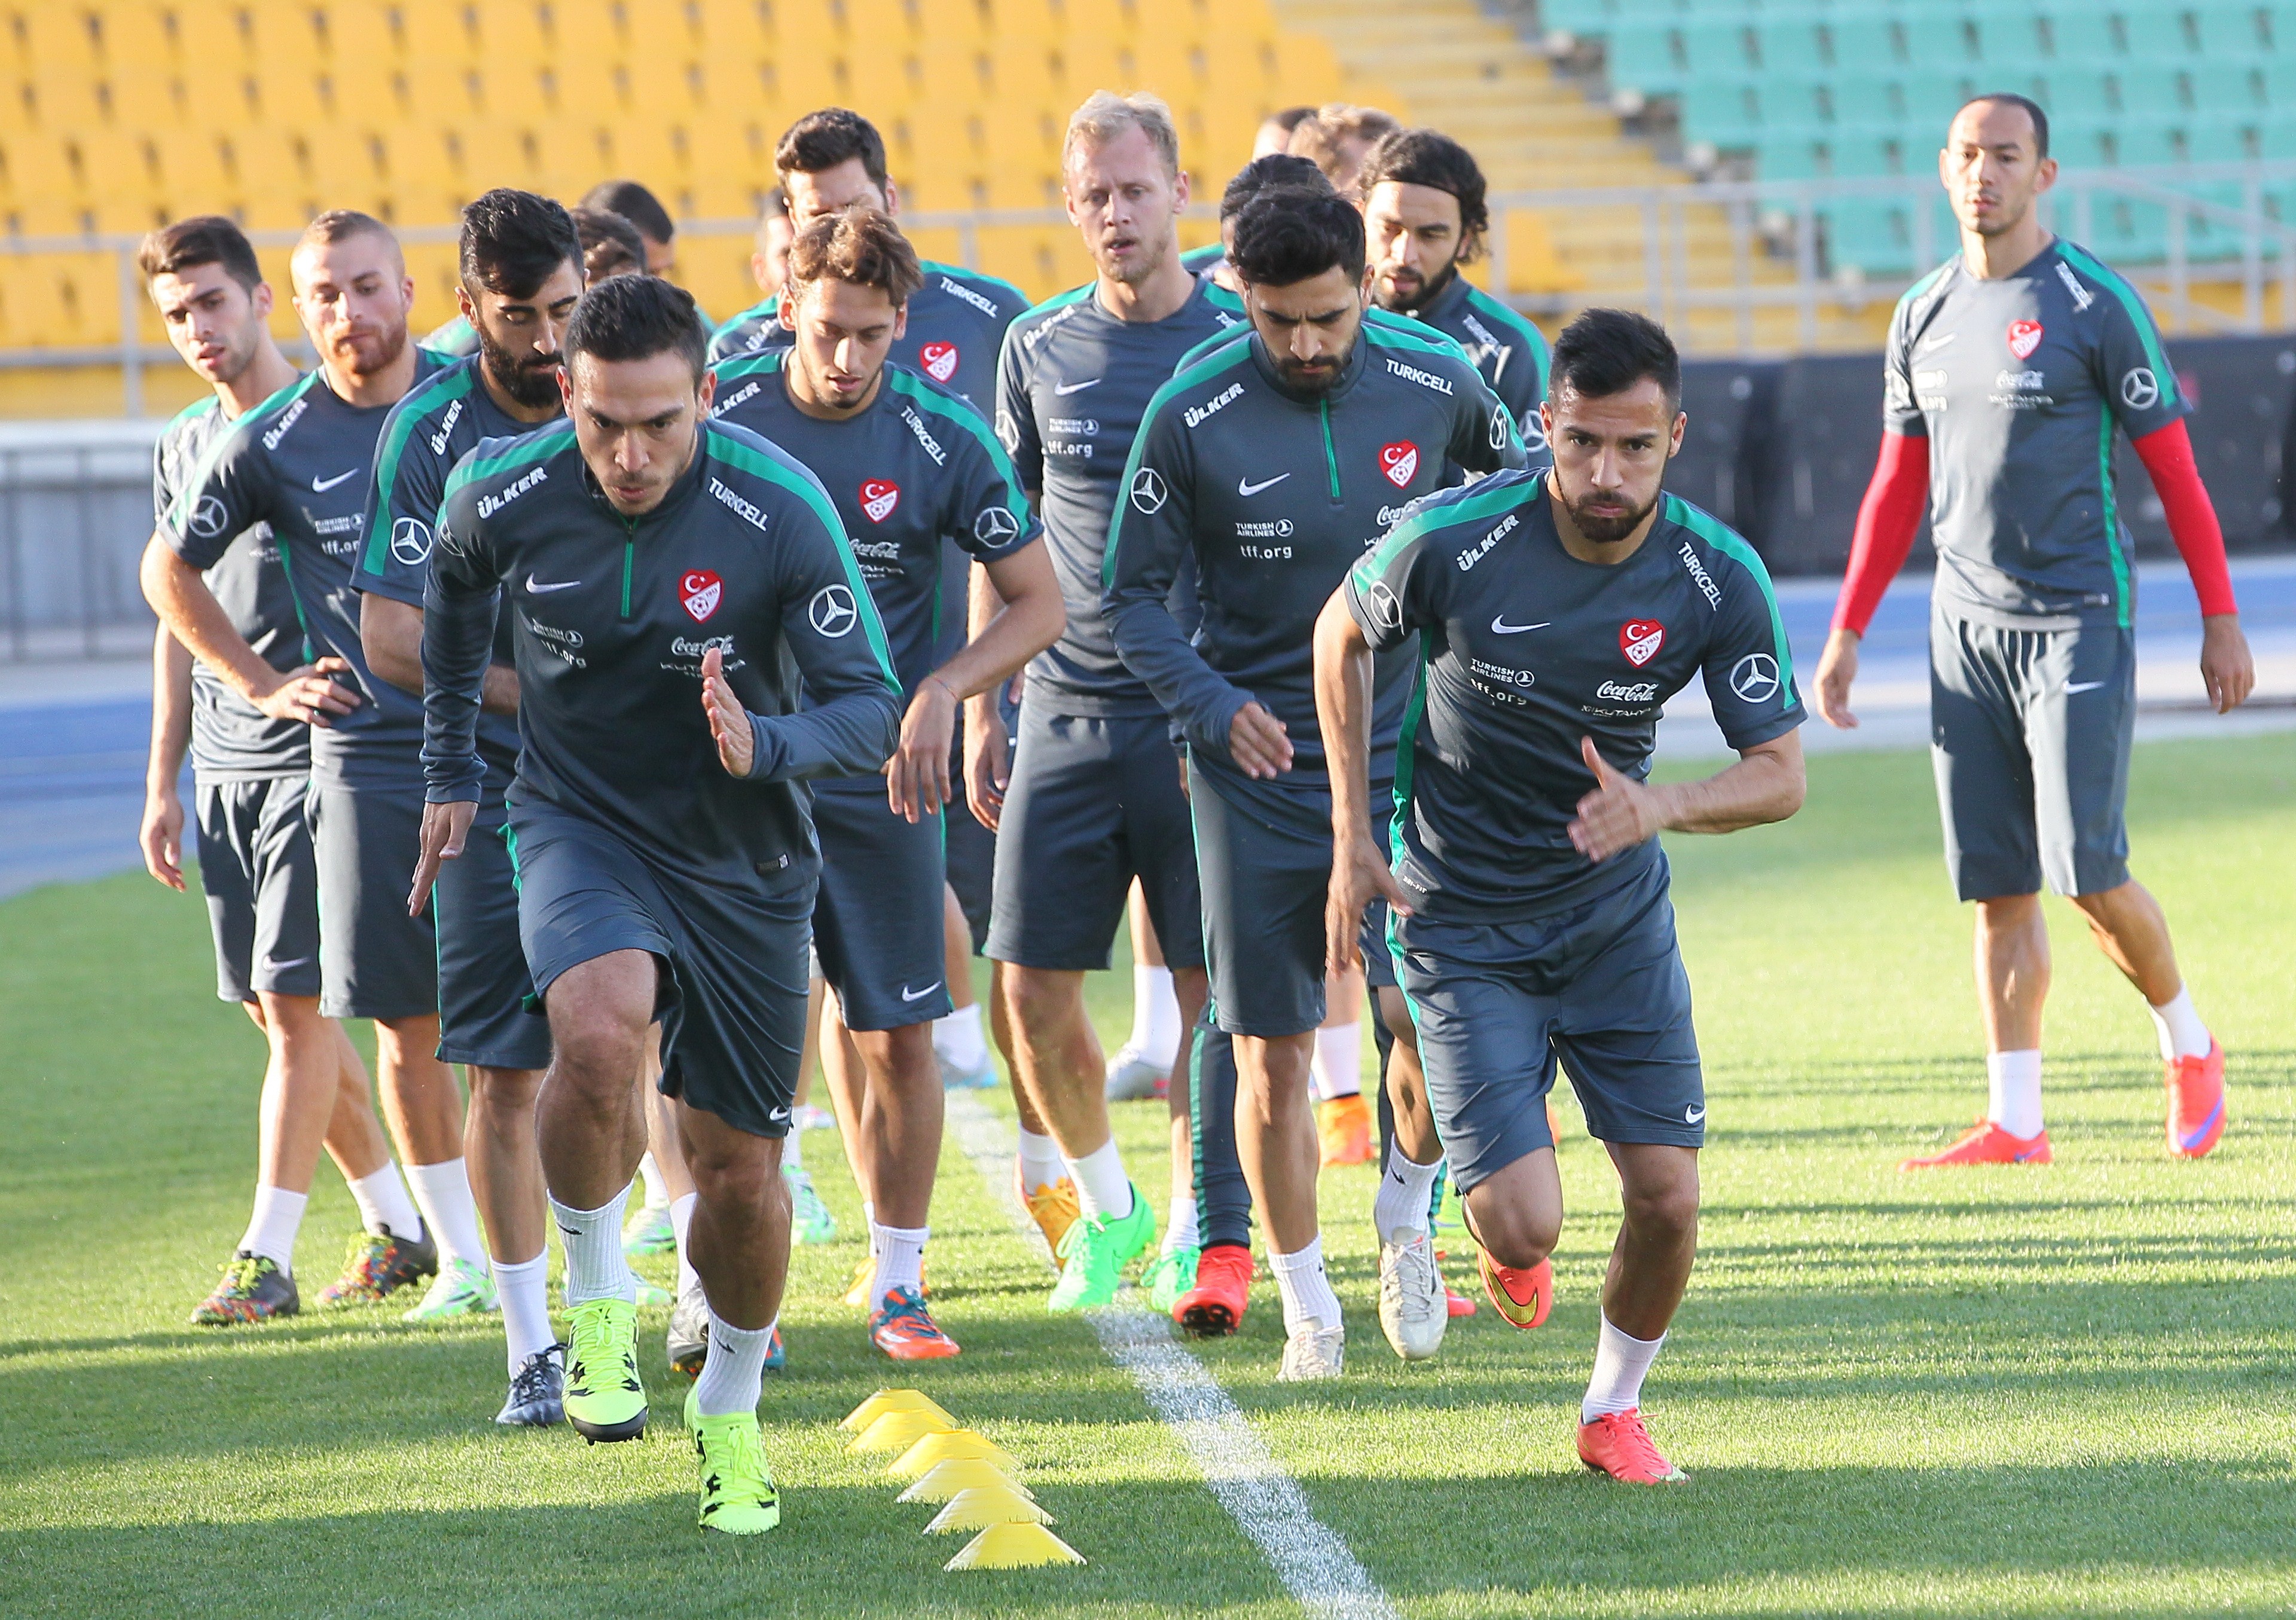 Turkey's players take part in a training session in Almaty on June 11, 2015, on the eve of the UEFA Euro 2016 Group A qualifying football match between Kazakhstan and Turkey. AFP PHOTO / STANISLAV FILIPPOV        (Photo credit should read STANISLAV FILIPPOV/AFP/Getty Images)